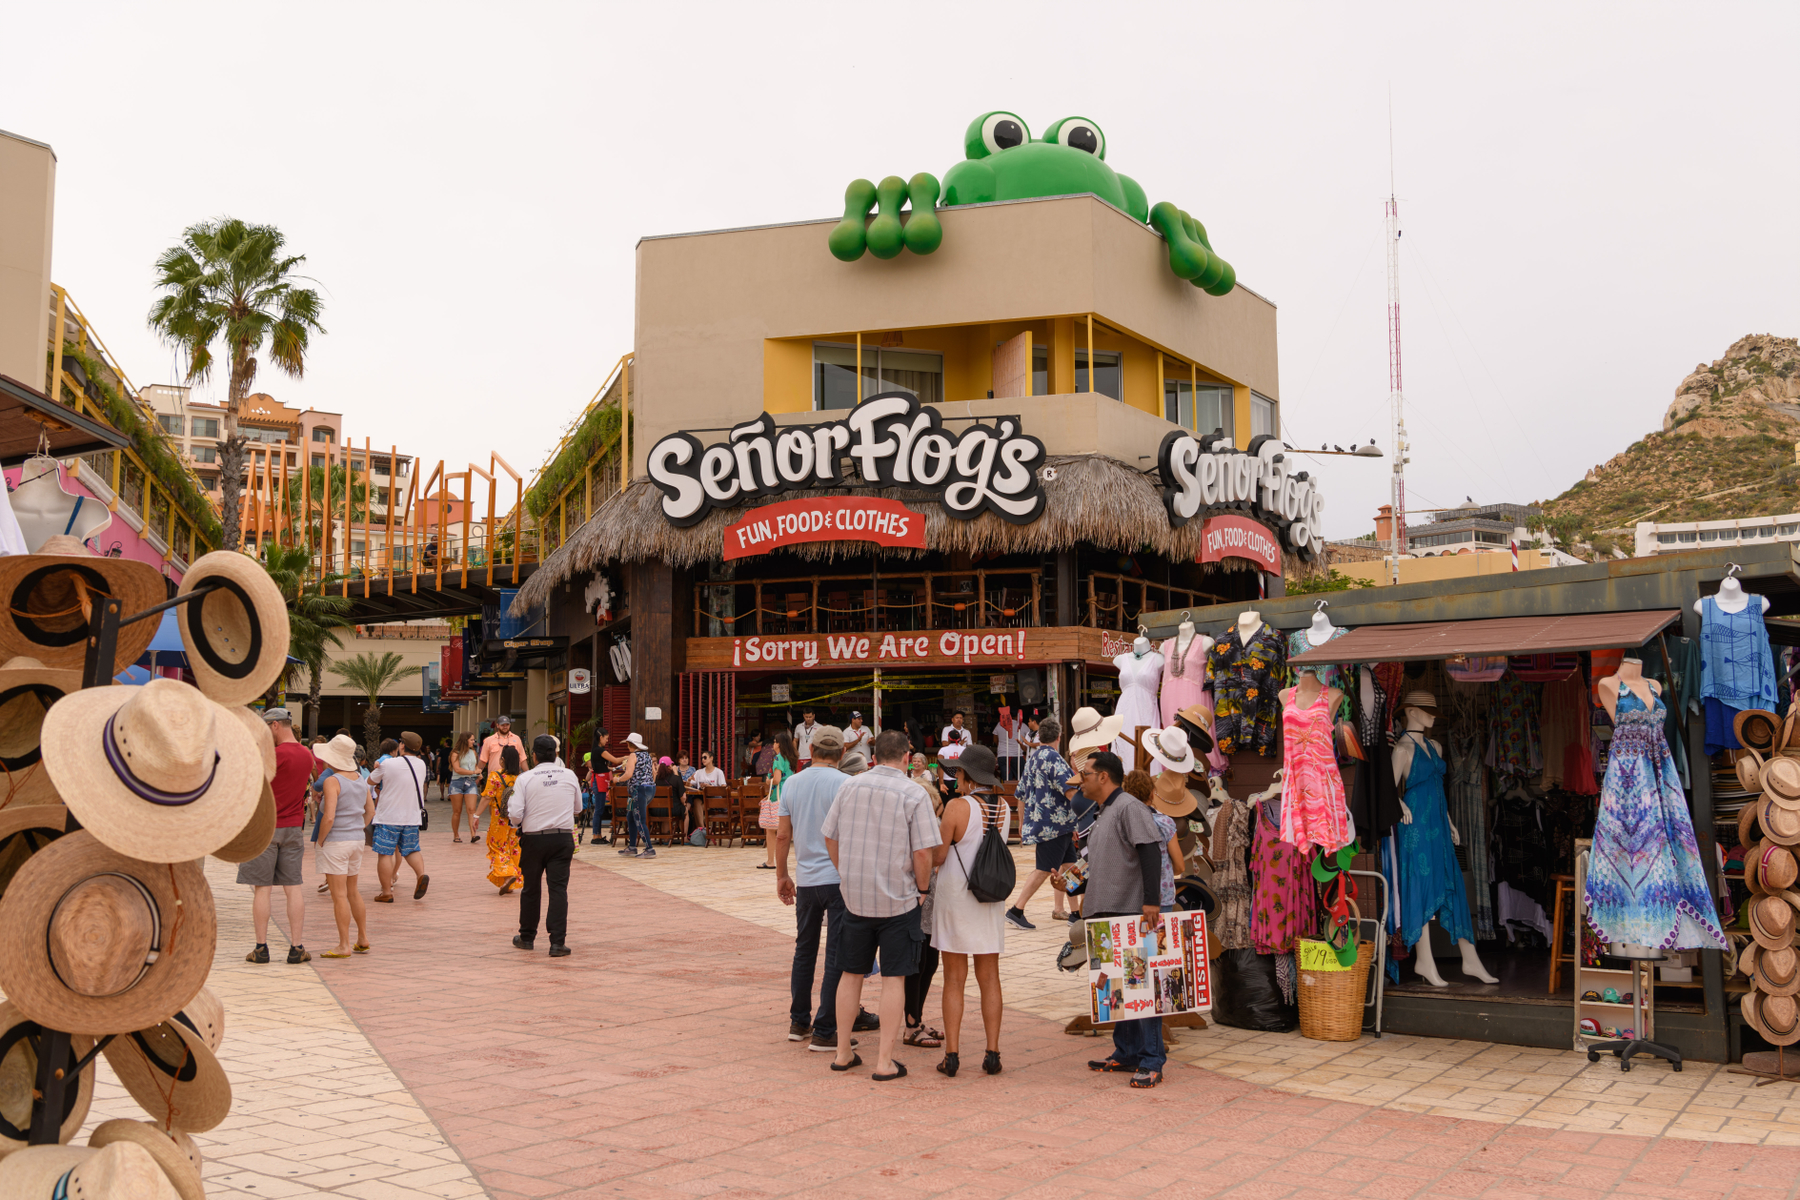 March 10, 2020Of course there is a Senor Frog's right next to the cruise ship pier.